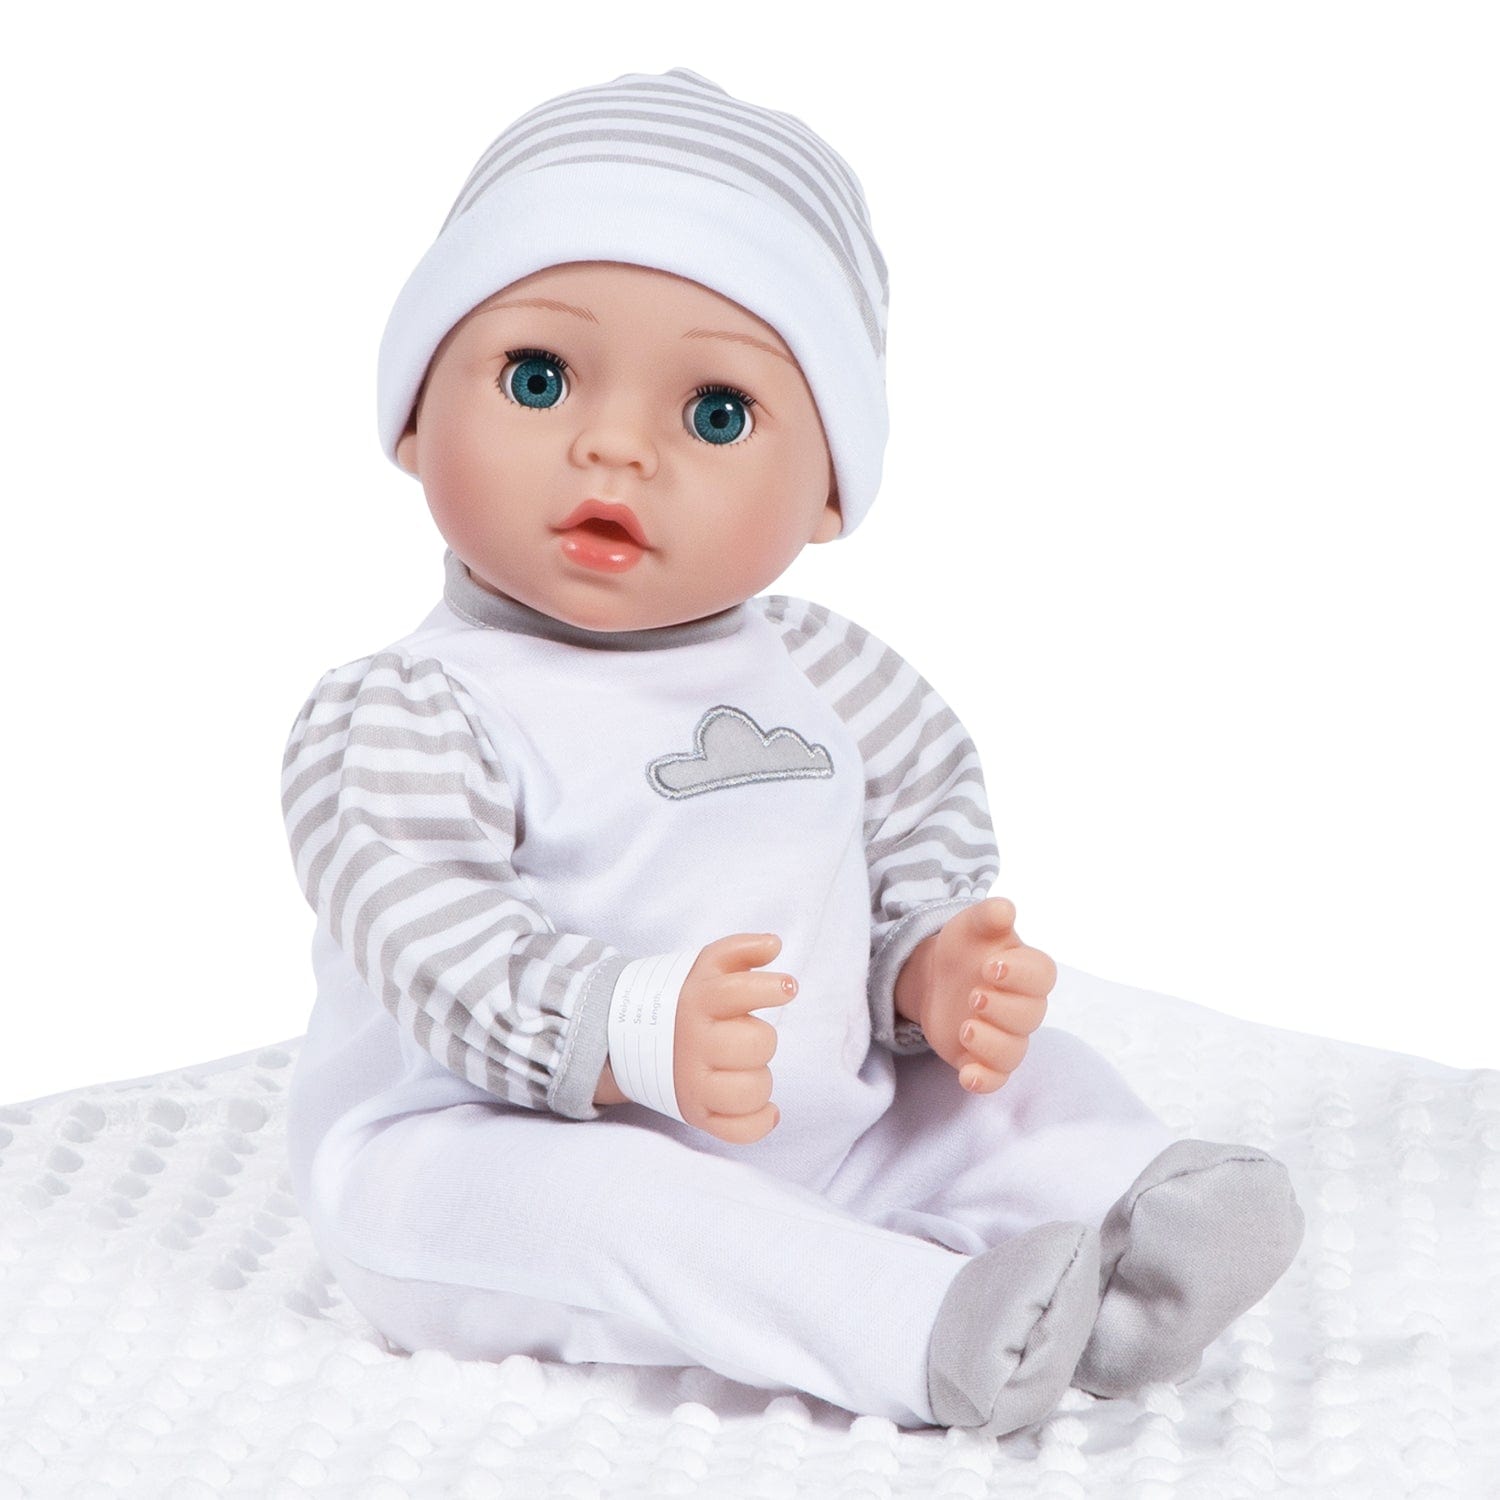 Gender-neutral baby doll set comes with one 16